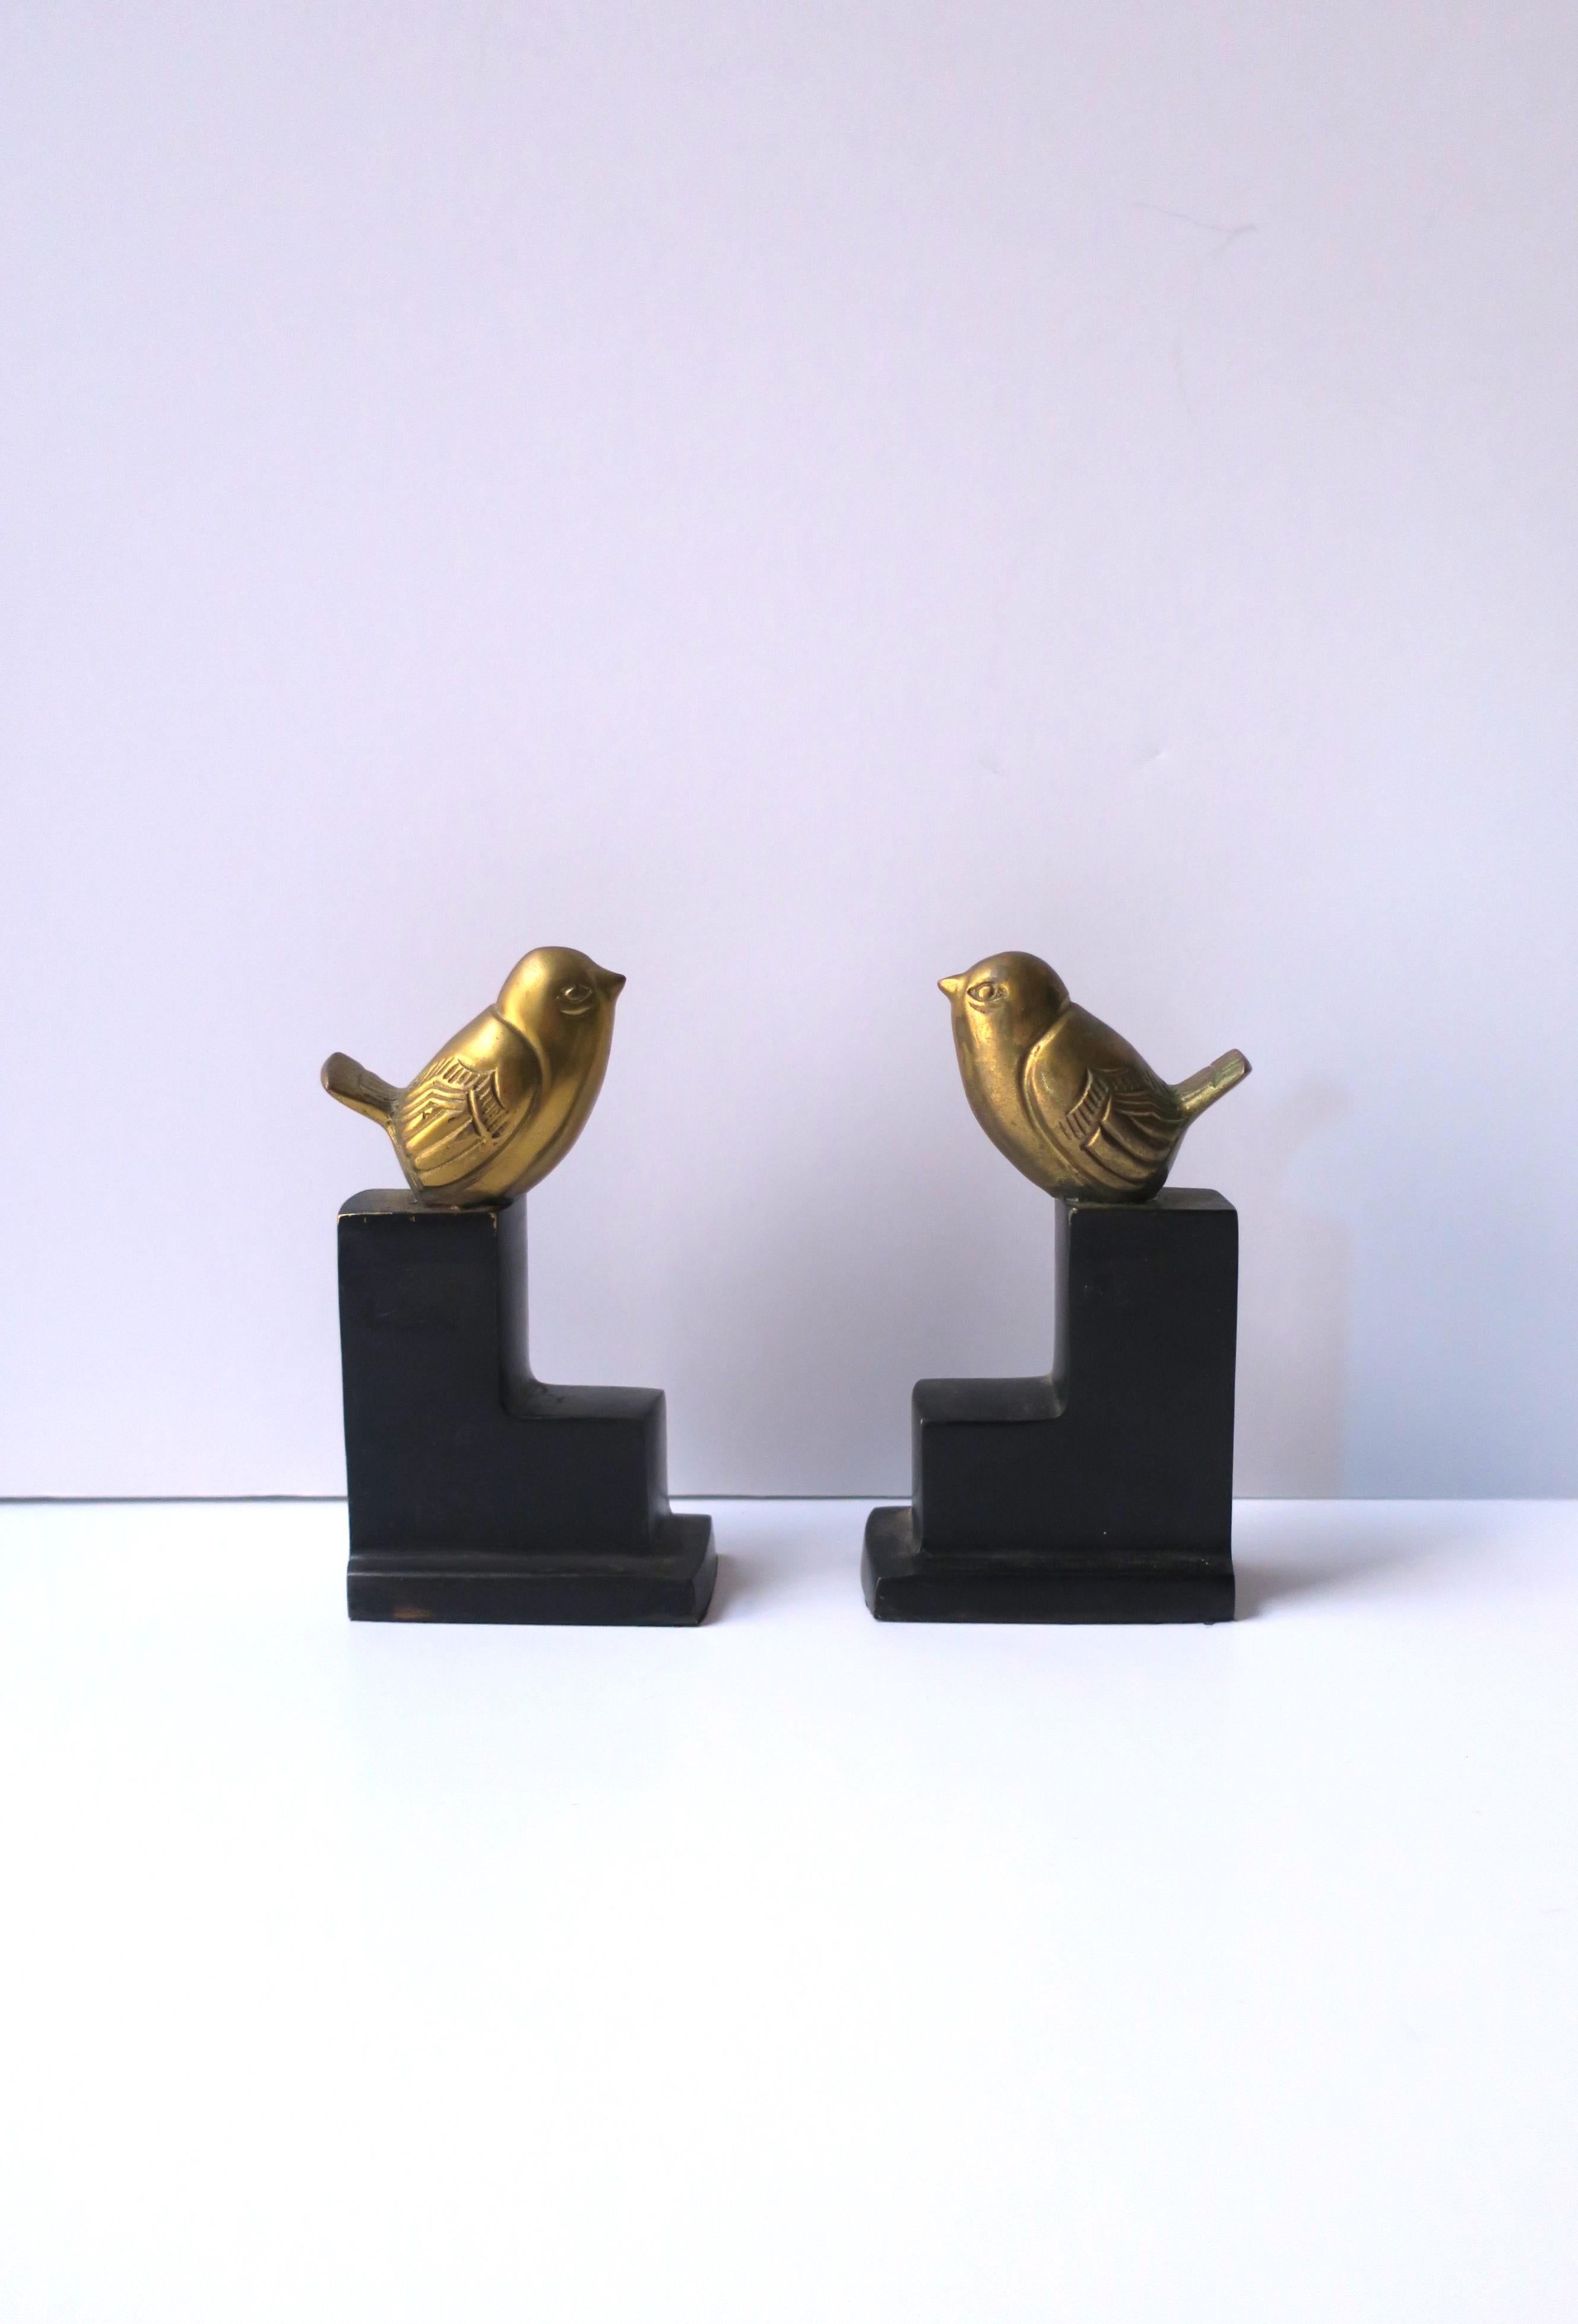 A pair of Art Deco brass birds on black marble bases decorative objects or bookends, circa early to mid-20th century. A modern set each with a brass bird on top of a graduated black marble base. A beautiful set for a shelf, library, mantle, as